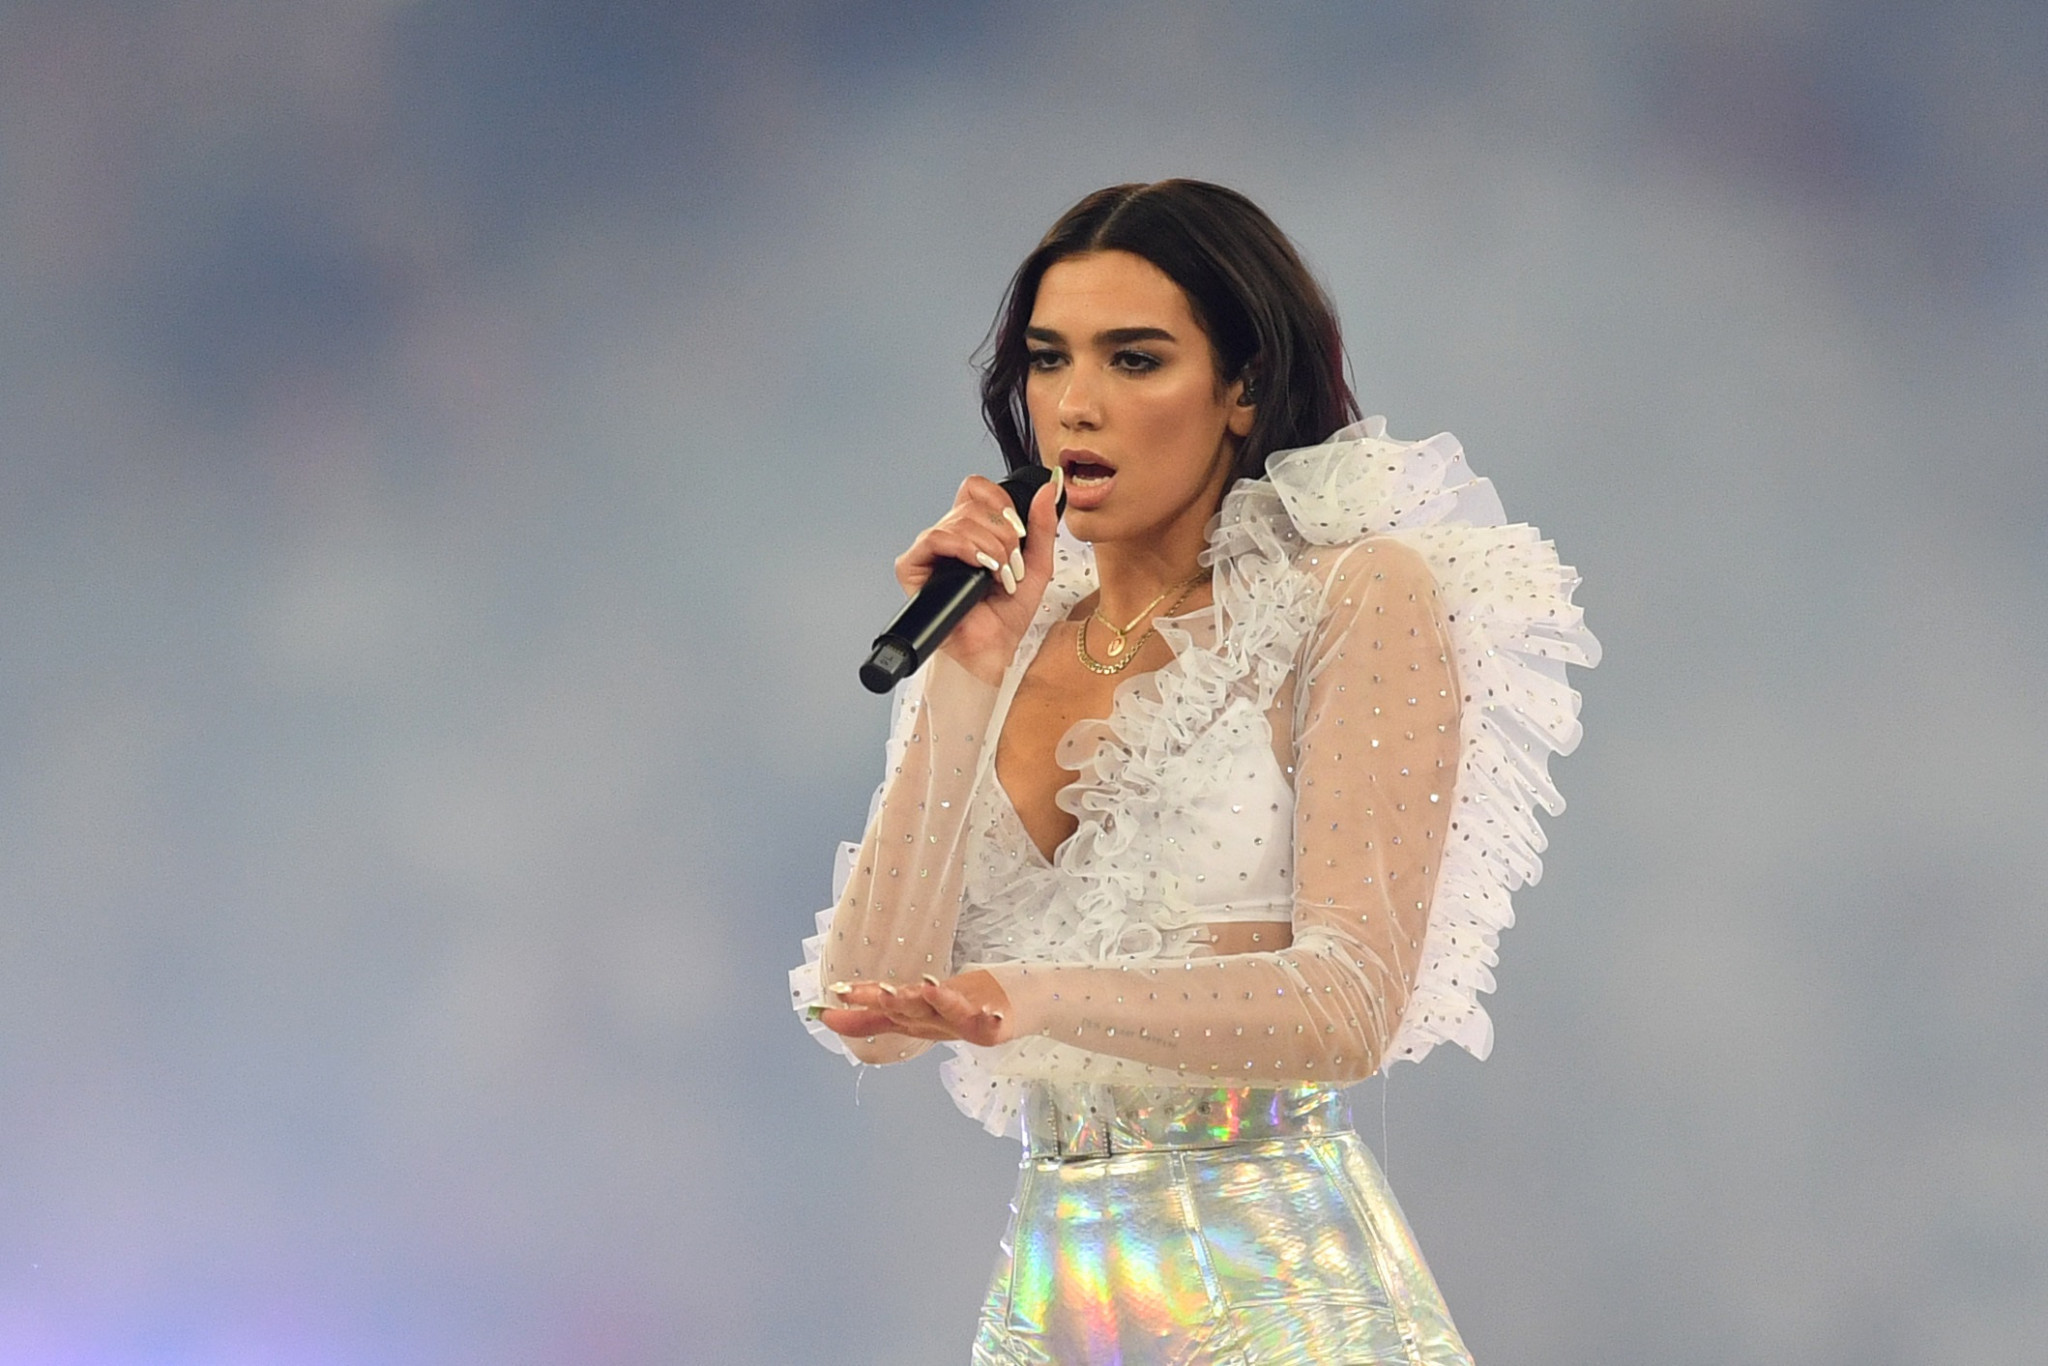 Dua Lipa scorches FIFA World Cup rumours, K-pop star Jungkook confirmed as performing in Qatar